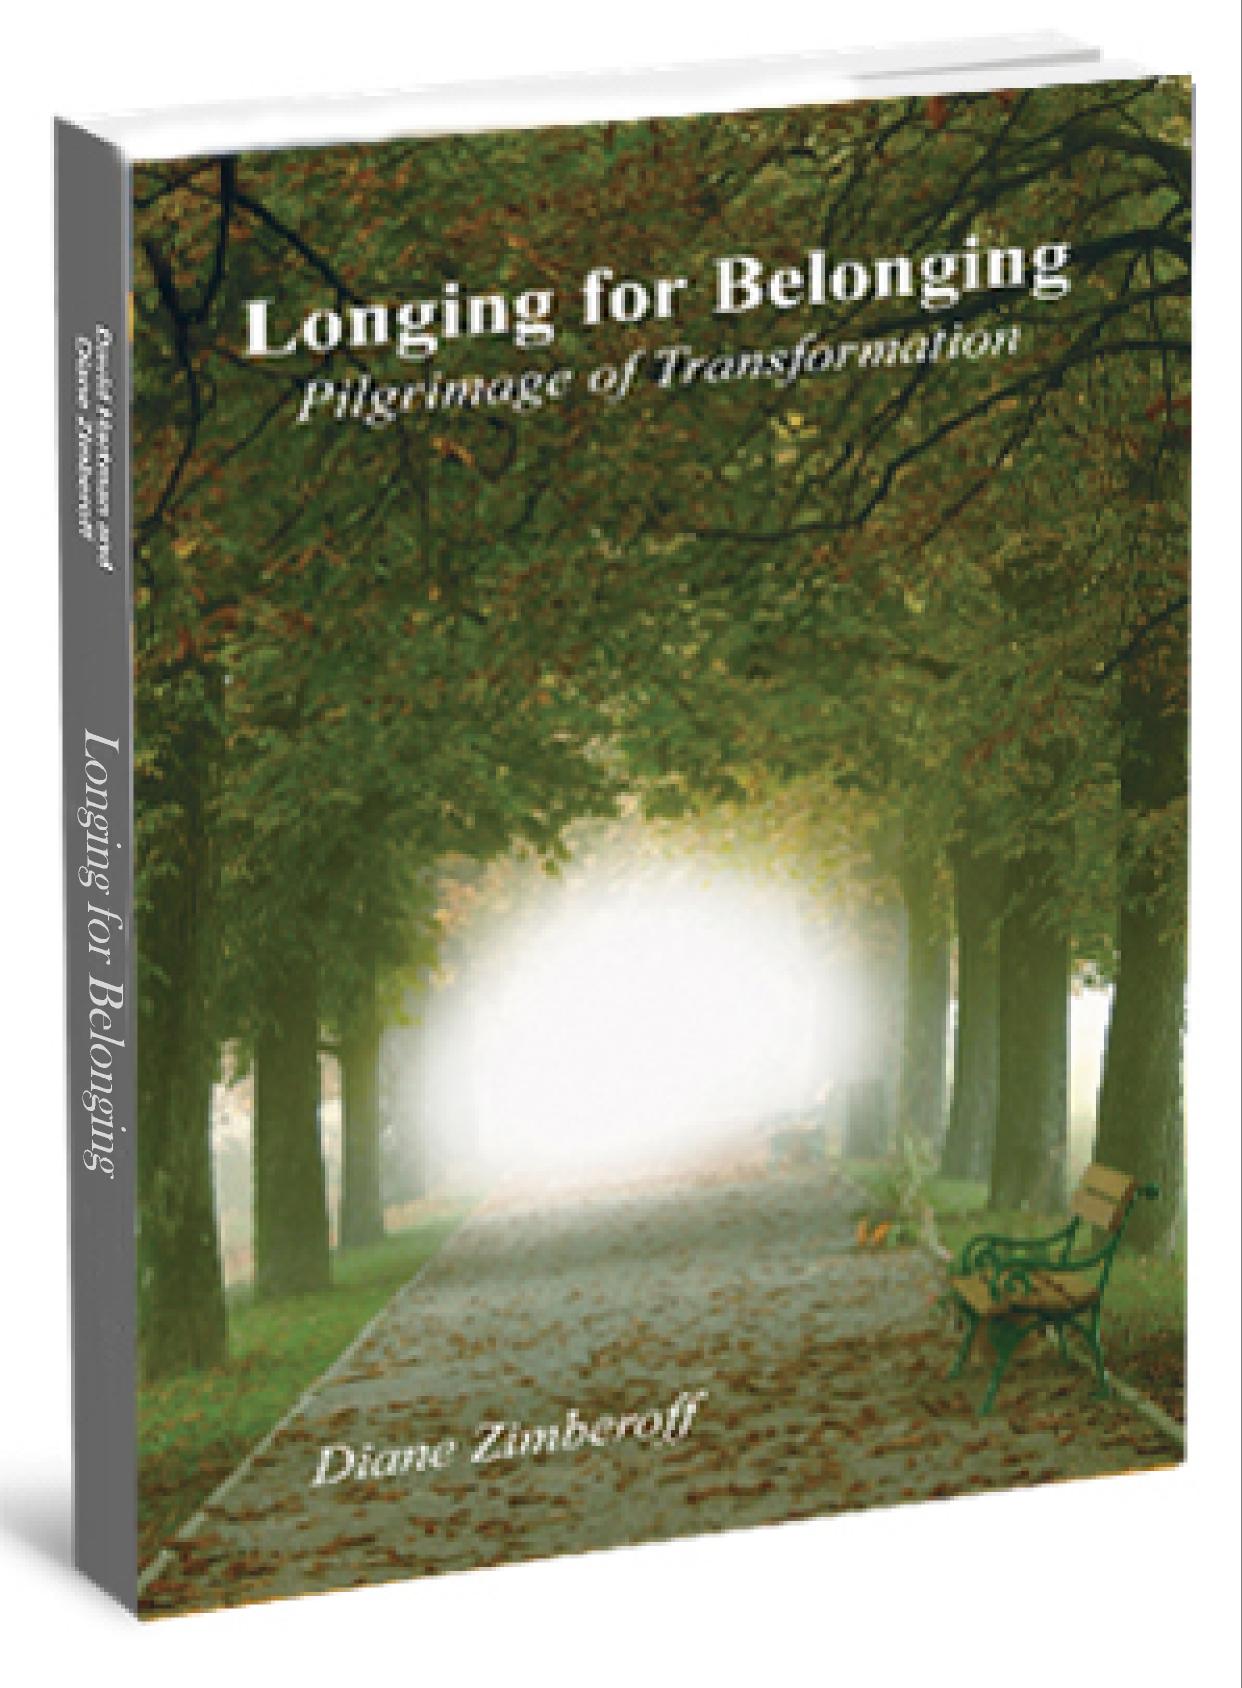 Longing cover perspective spine